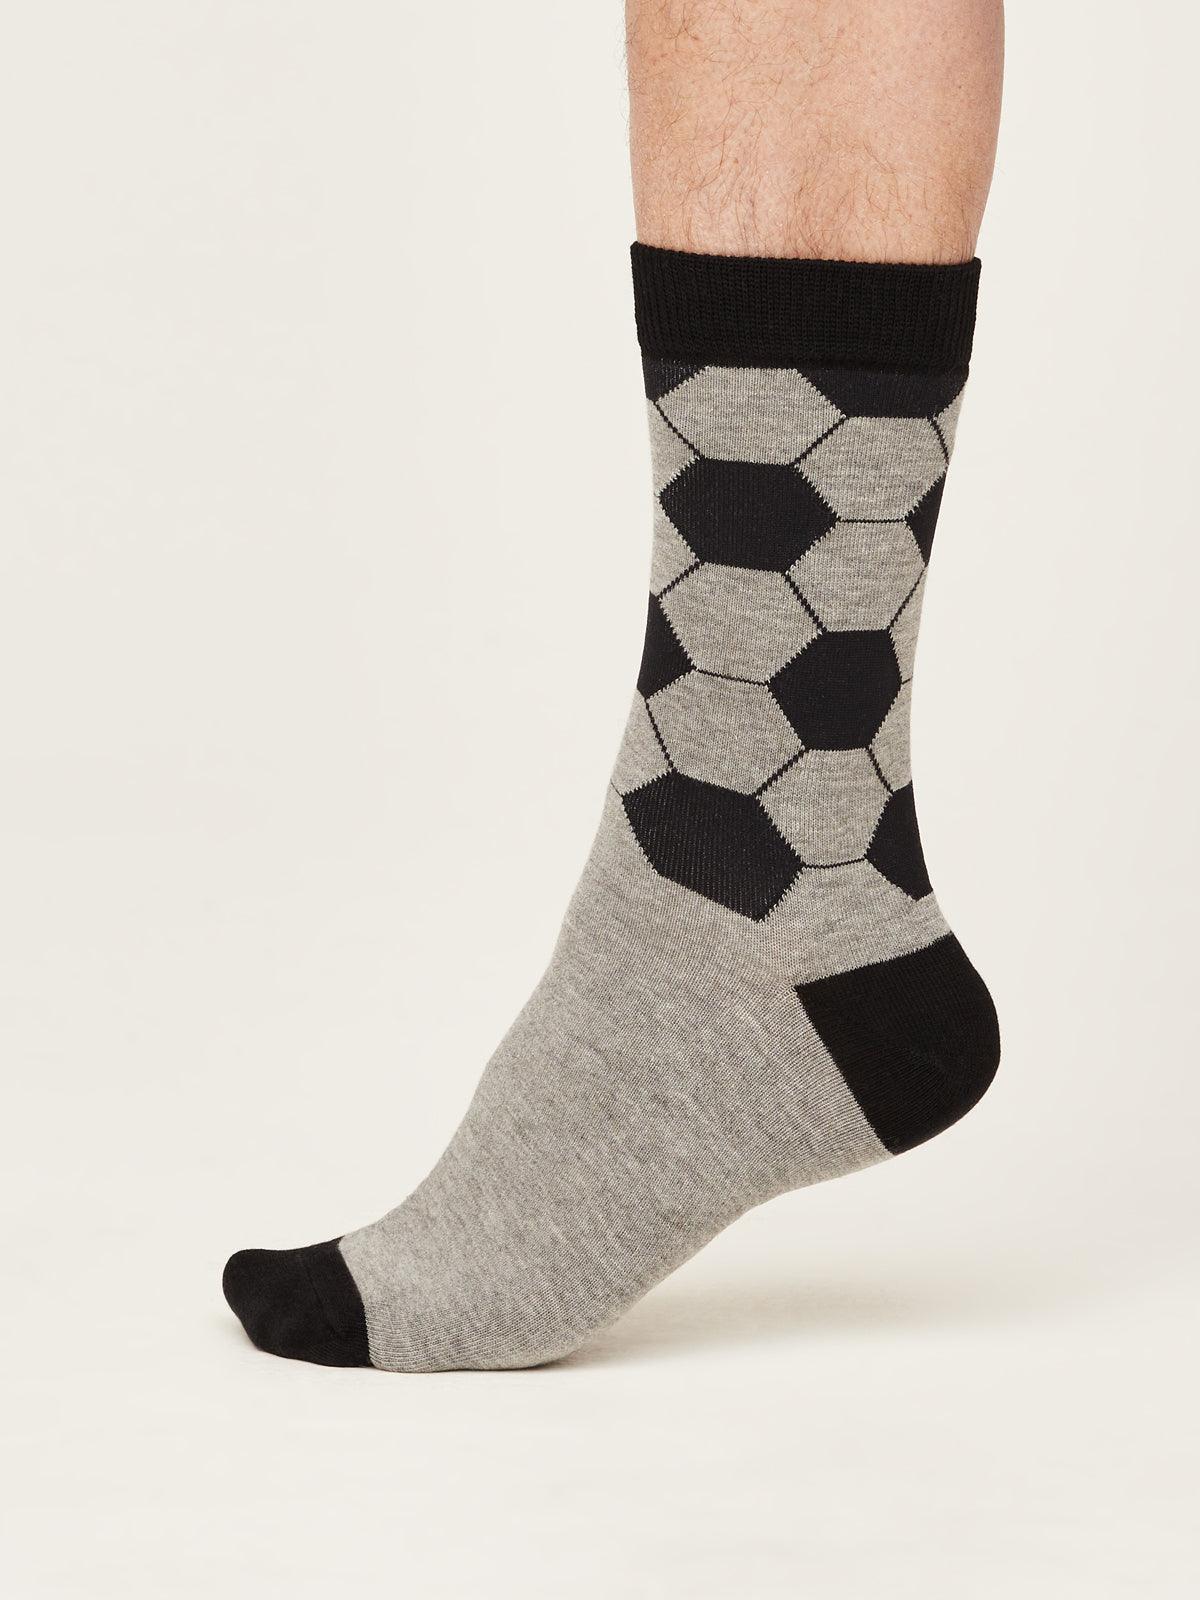 Gots Football Socks In A Bag - Grey Marle - Thought Clothing UK